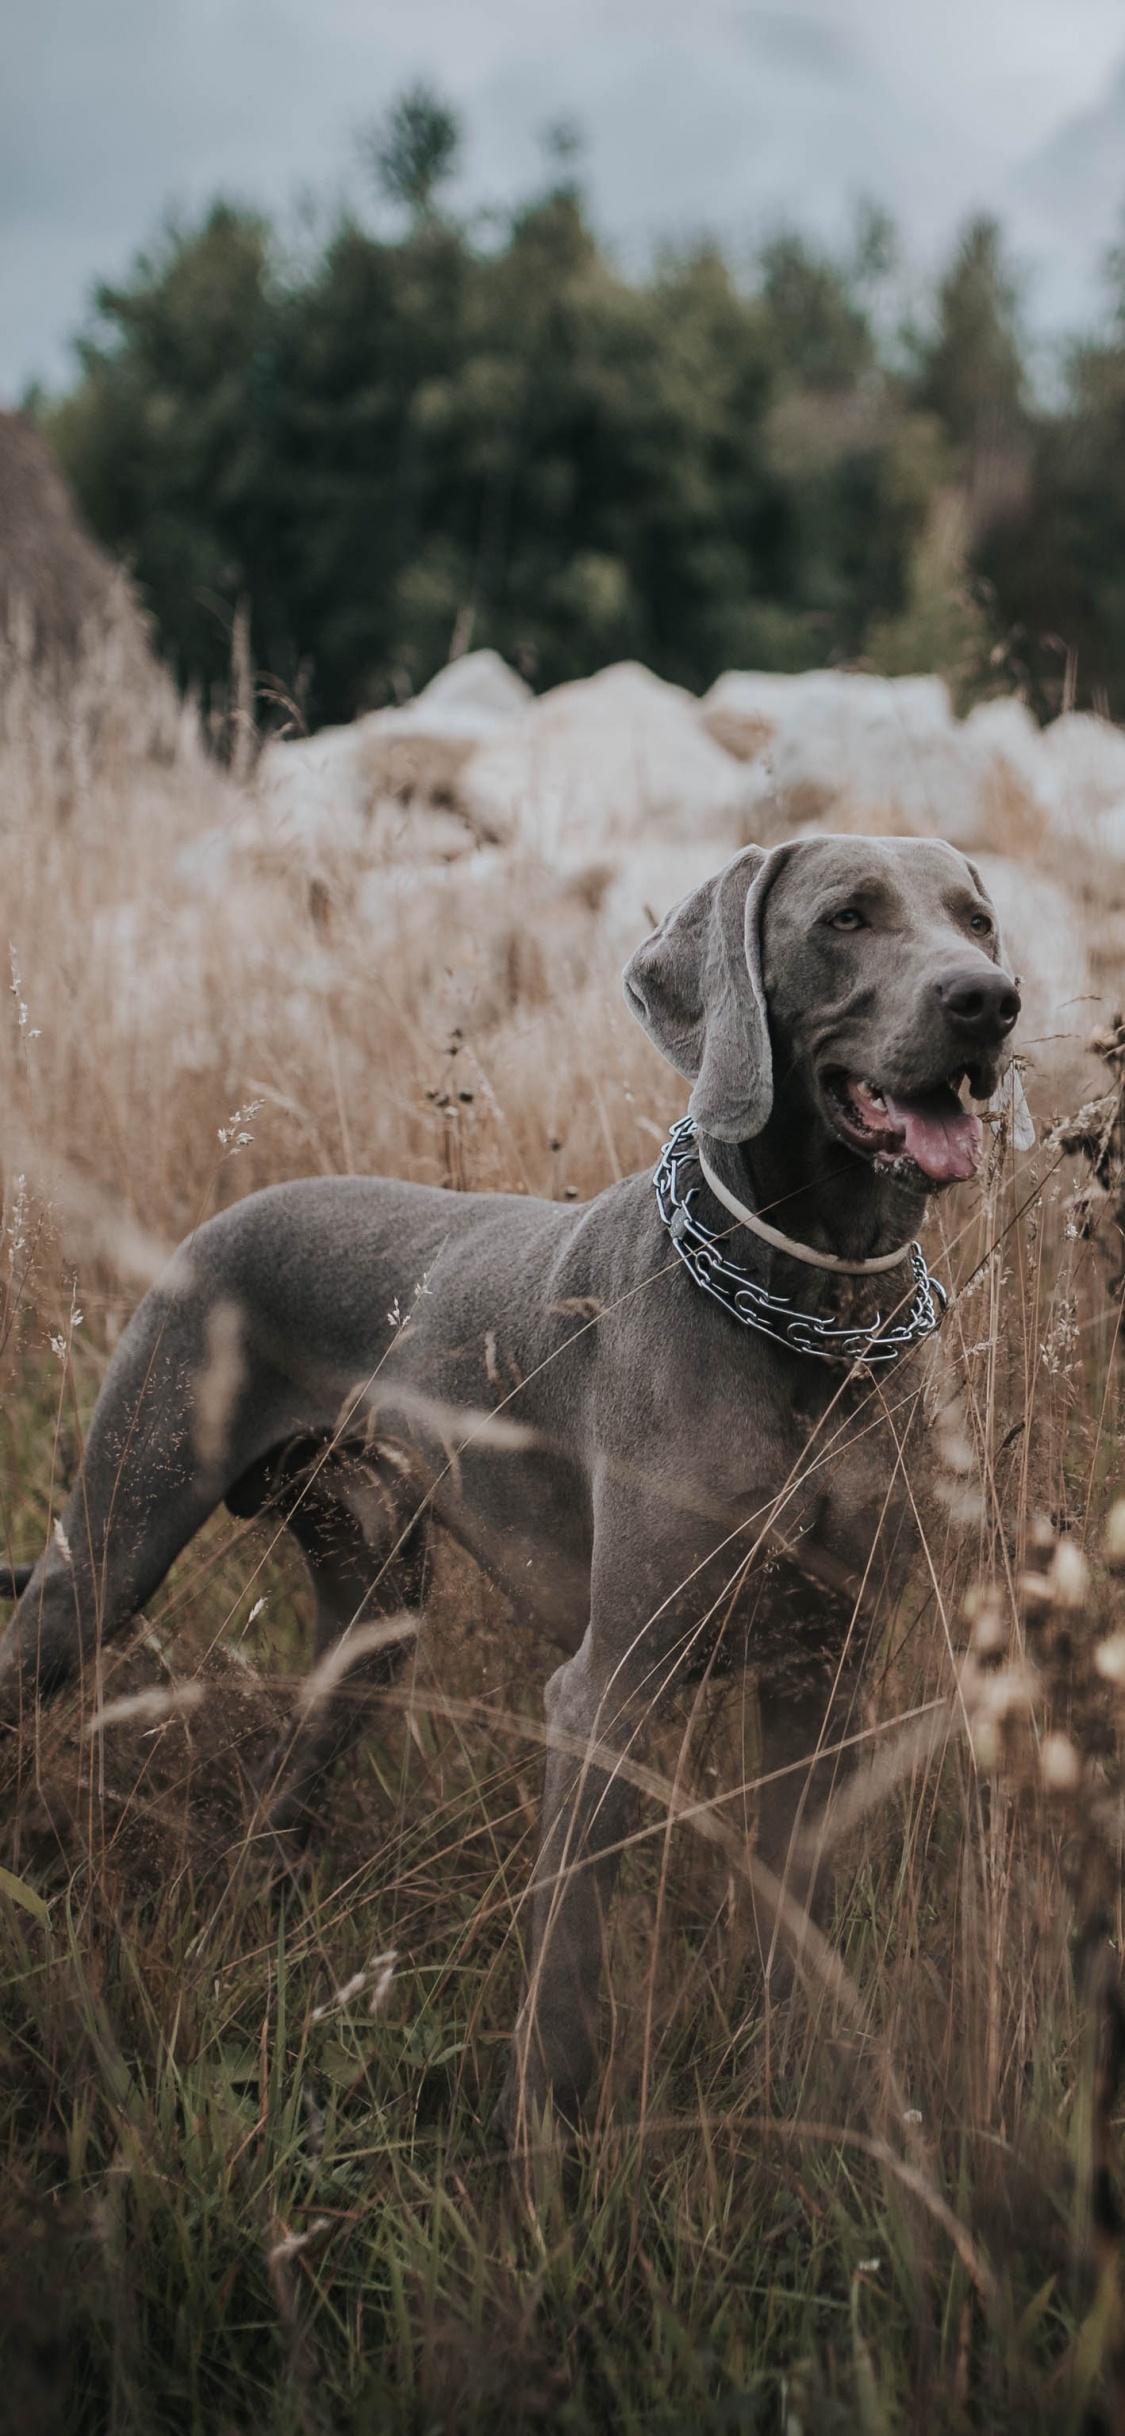 Gray Short Coated Dog on Brown Grass Field During Daytime. Wallpaper in 1125x2436 Resolution